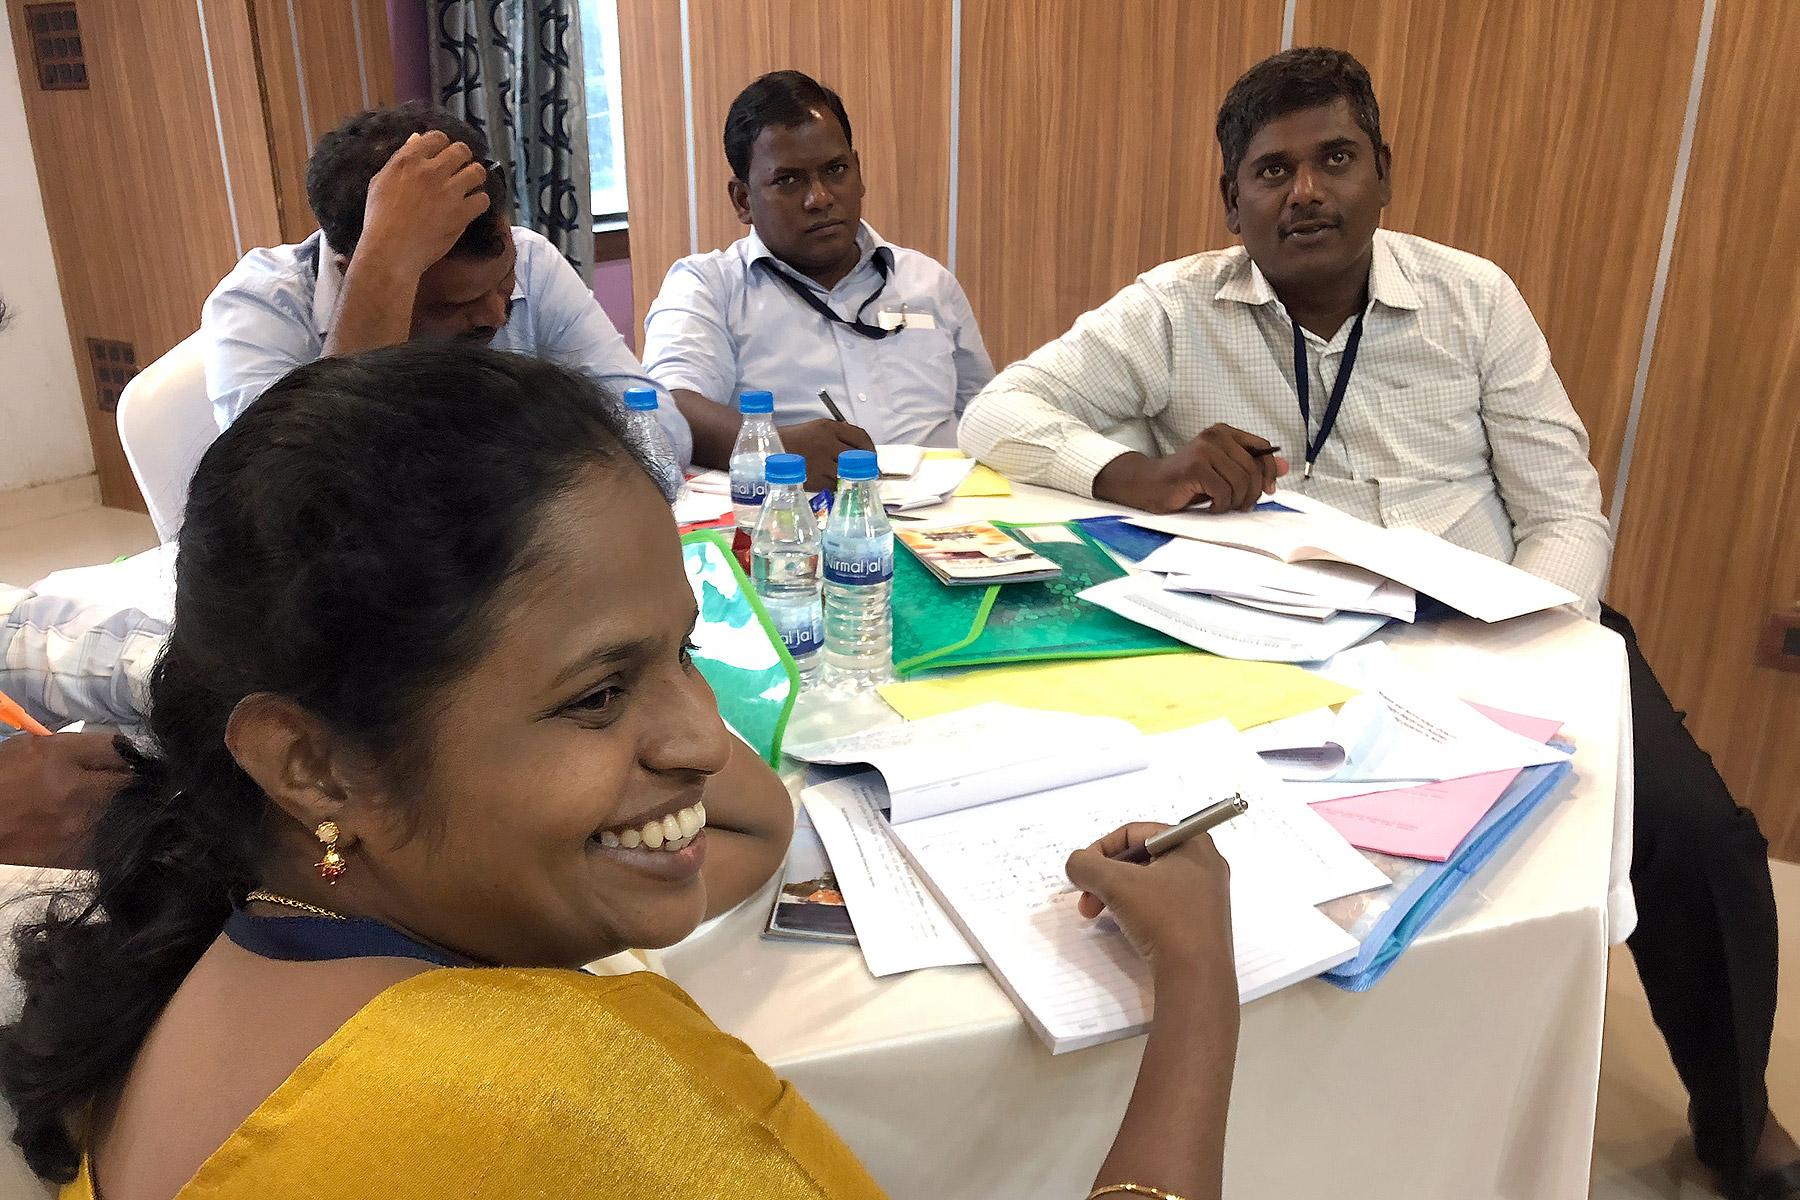 Participants in a diaconal workshop in Ranchi, India, September 2018. Photo: LWF/Marina DÃ¶lker